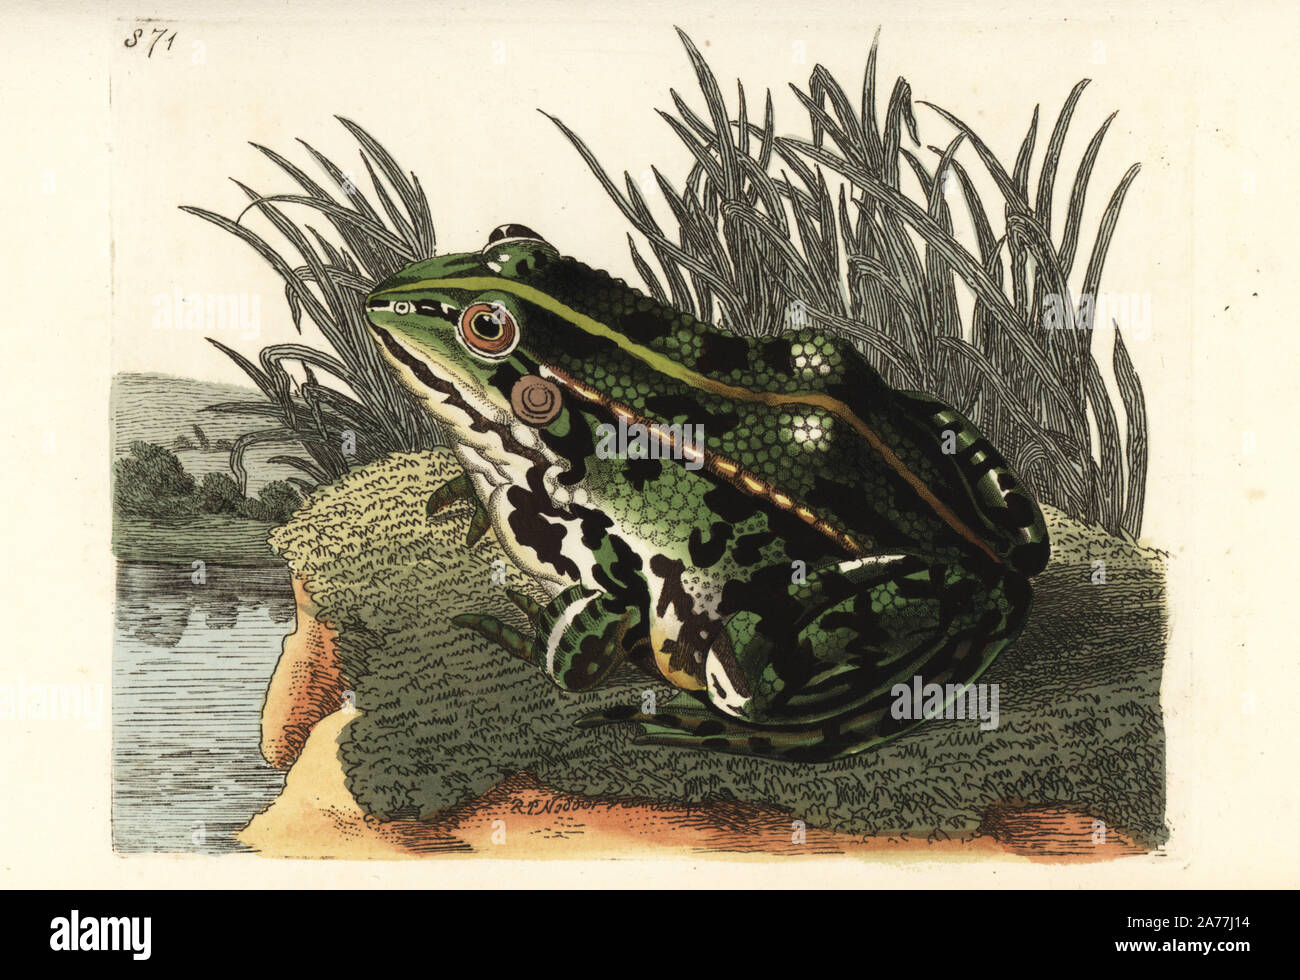 Edible frog or common green frog, Pelophylax kl. esculentus (Green frog, Rana esculenta). Illustration drawn and engraved by Richard Polydore Nodder. Handcoloured copperplate engraving from George Shaw and Frederick Nodder's The Naturalist's Miscellany, London, 1806. Stock Photo